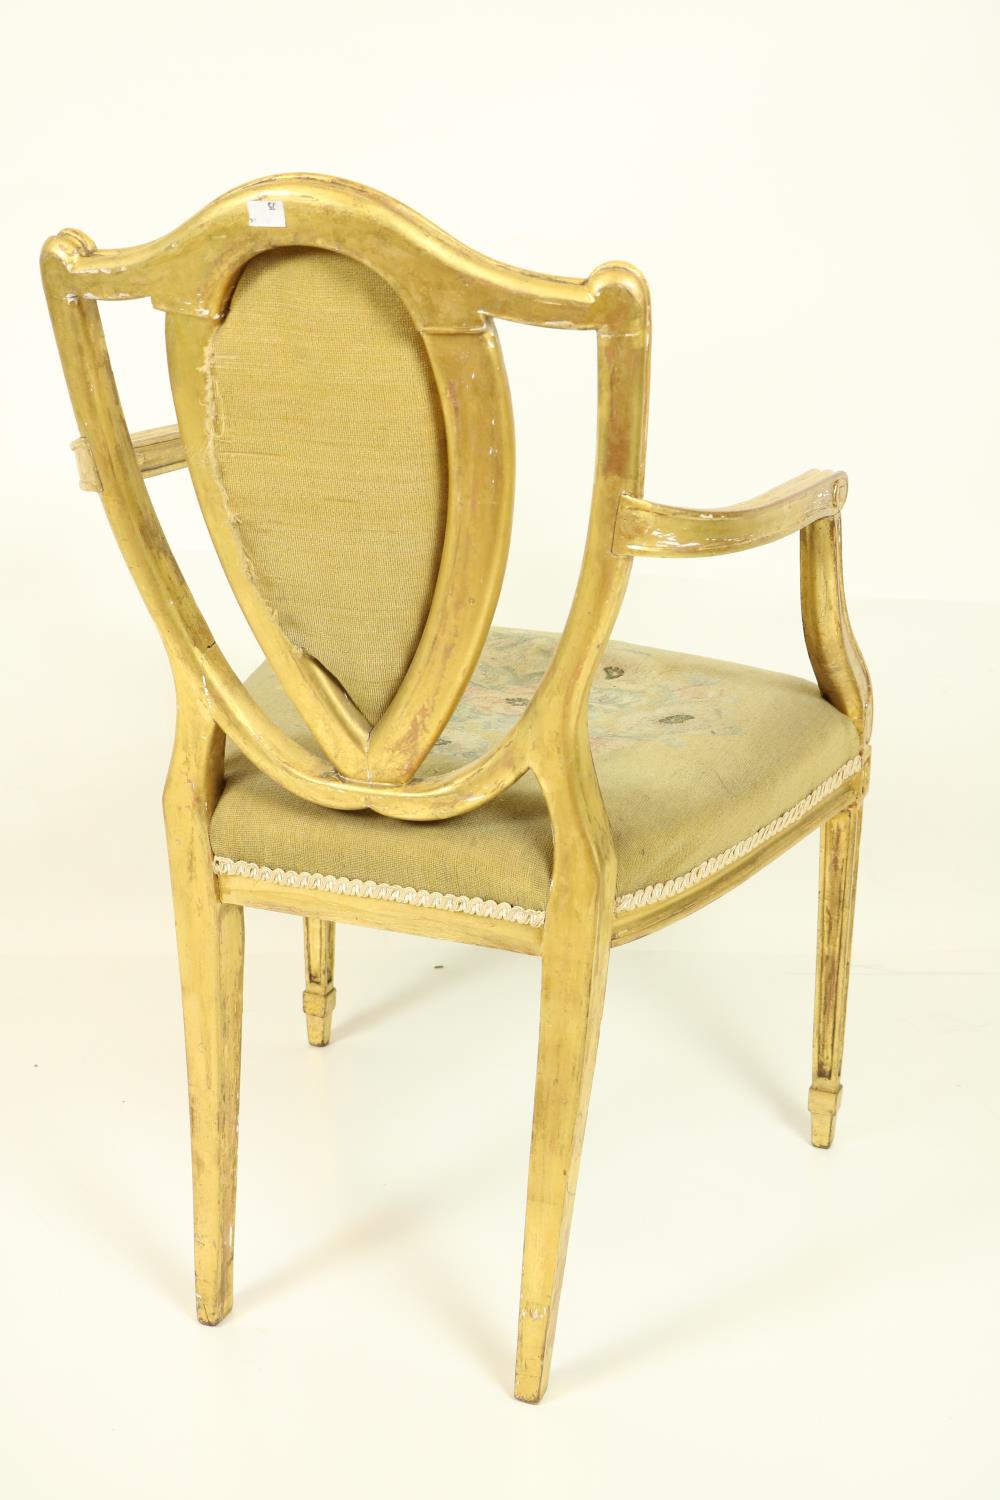 A fine set of four Regency gilt Open Armchairs, in the manner of James Wyatt (1746-1813), each - Image 7 of 7